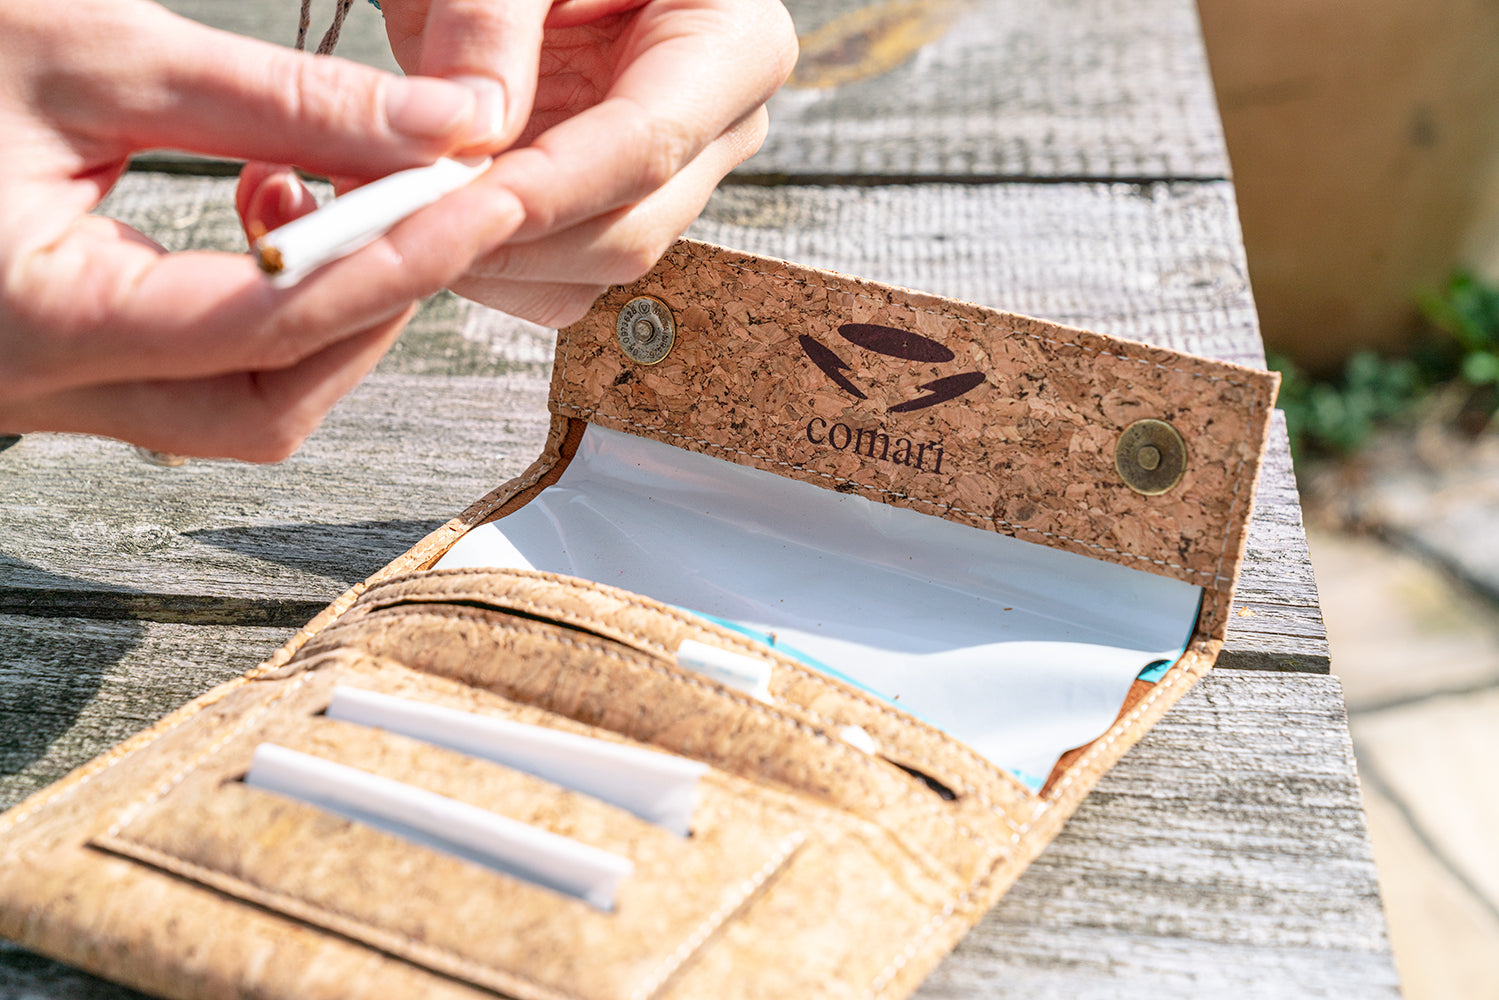 Tobacco pouch 'Corbuk' made of natural cork